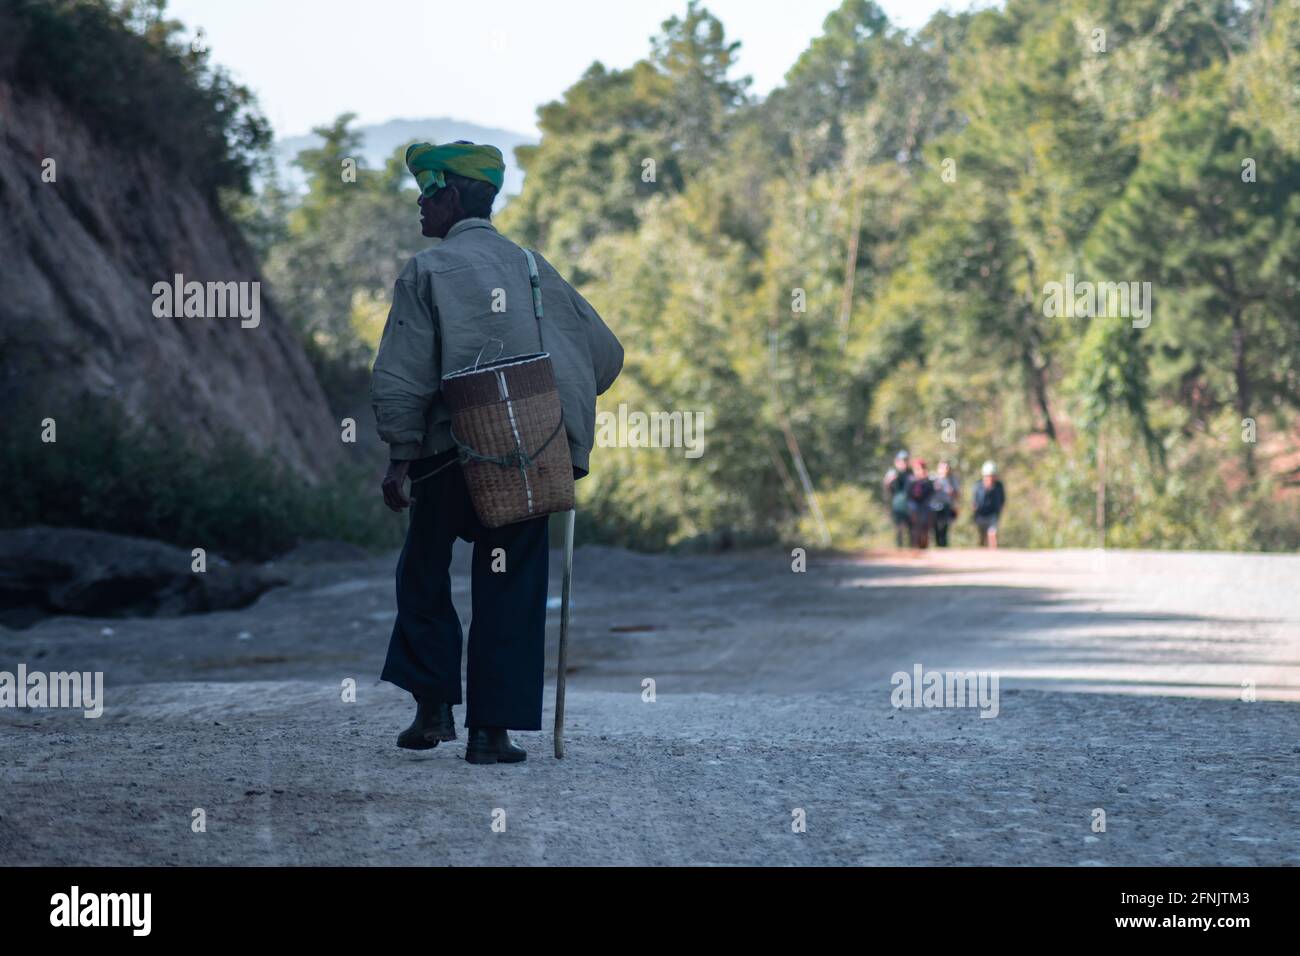 A local burmese man carries a basket on his back and walks down a gravel road with a walking stick between Kalaw and Inle Lake, Shan state, Myanmar Stock Photo